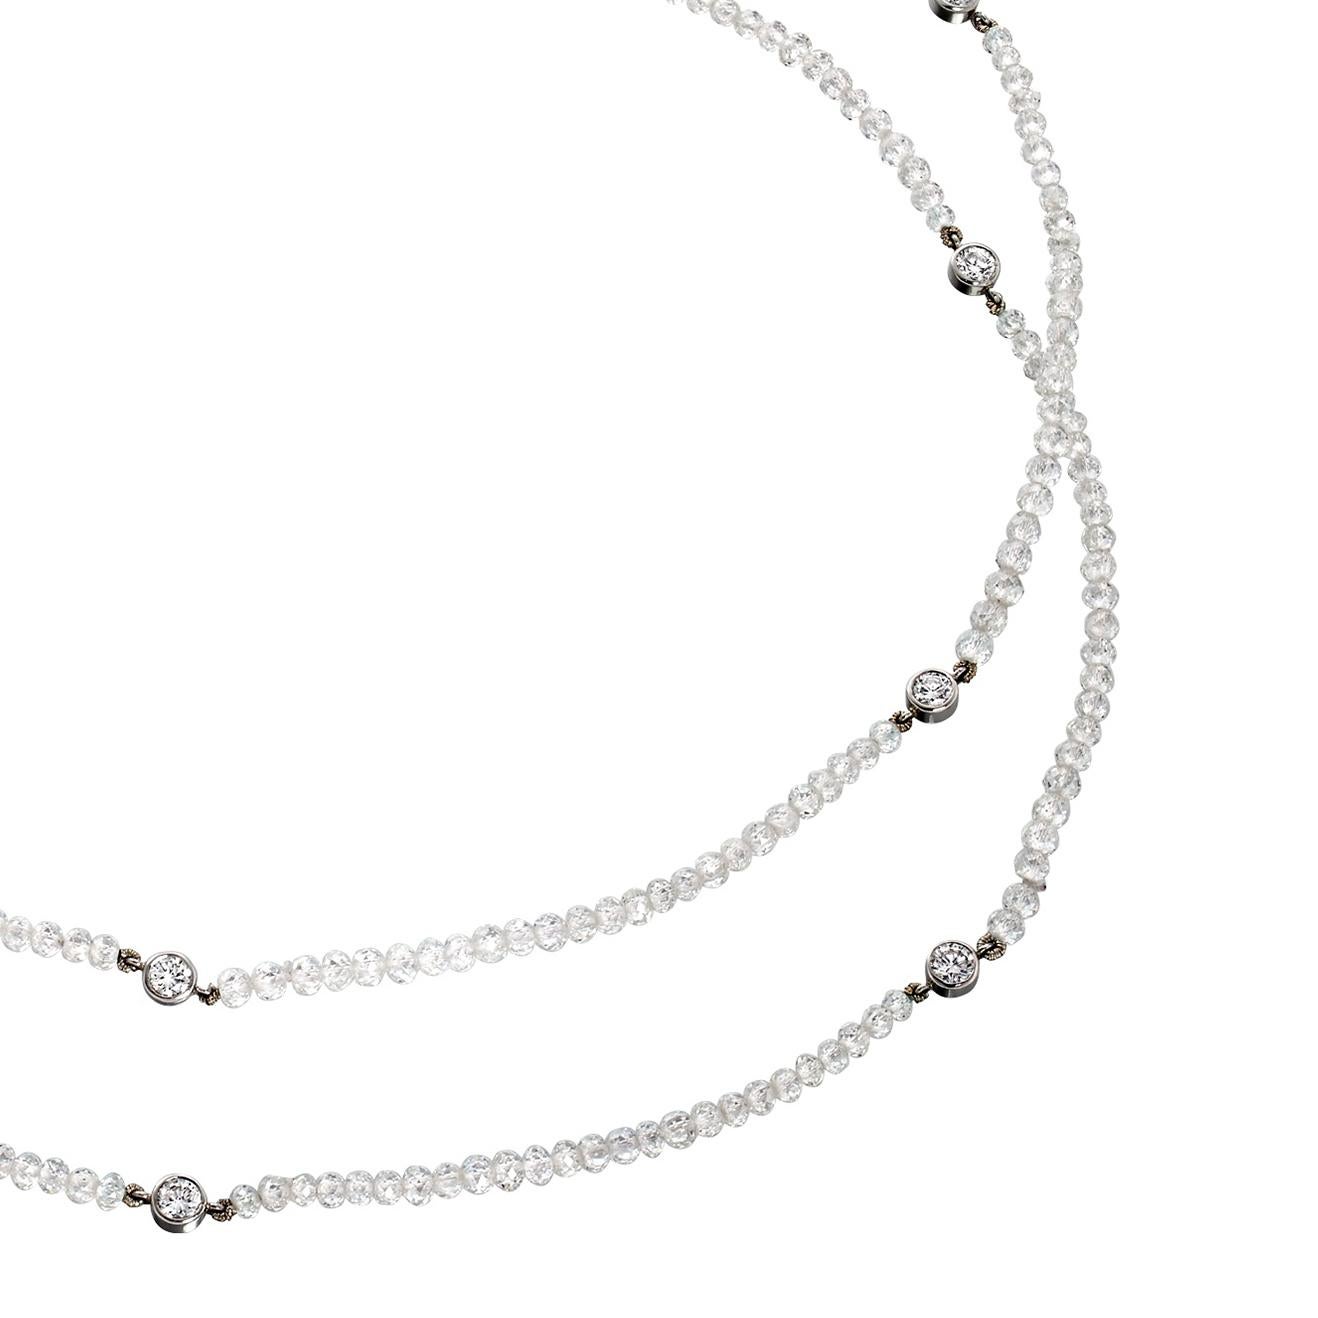 A beautiful Art Deco briolette diamond necklace interspersed with rondel's of brilliant cut diamonds and a diamond set clasp.

- 275 briolette diamond beads weighing 39.36 carats
- 80 round diamonds totalling approx 1.87 carats
- Unique handmade